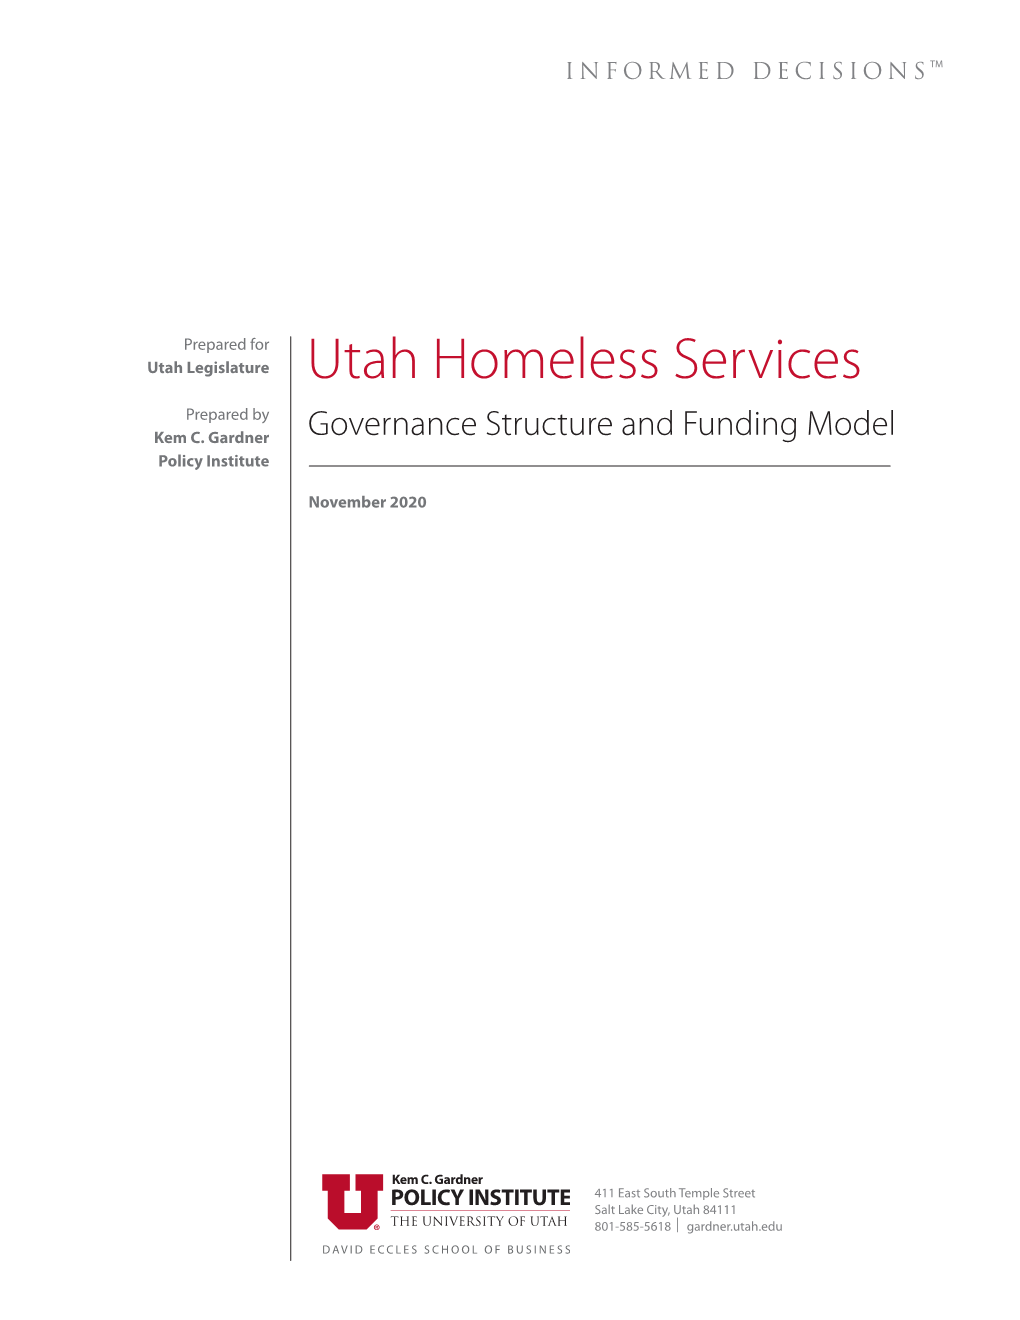 Utah Homeless Services Governance Structure and Funding Model